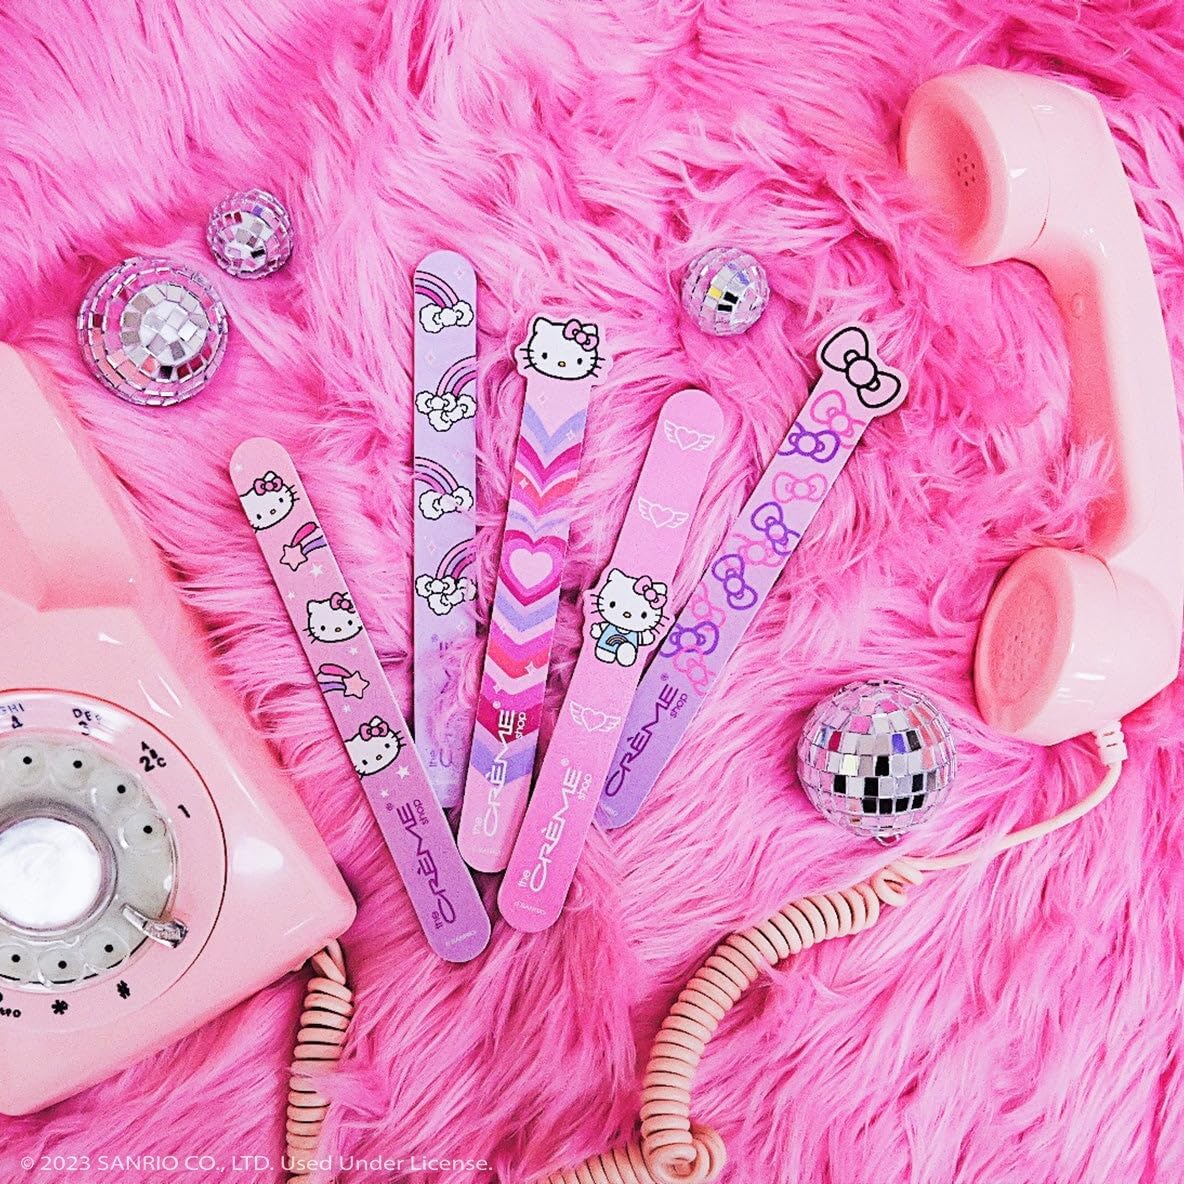 The Creme Shop x Hello Kitty Collection Totally Cute! Nail Files - Set of 5 - Kiokii and... | Kiokii and...